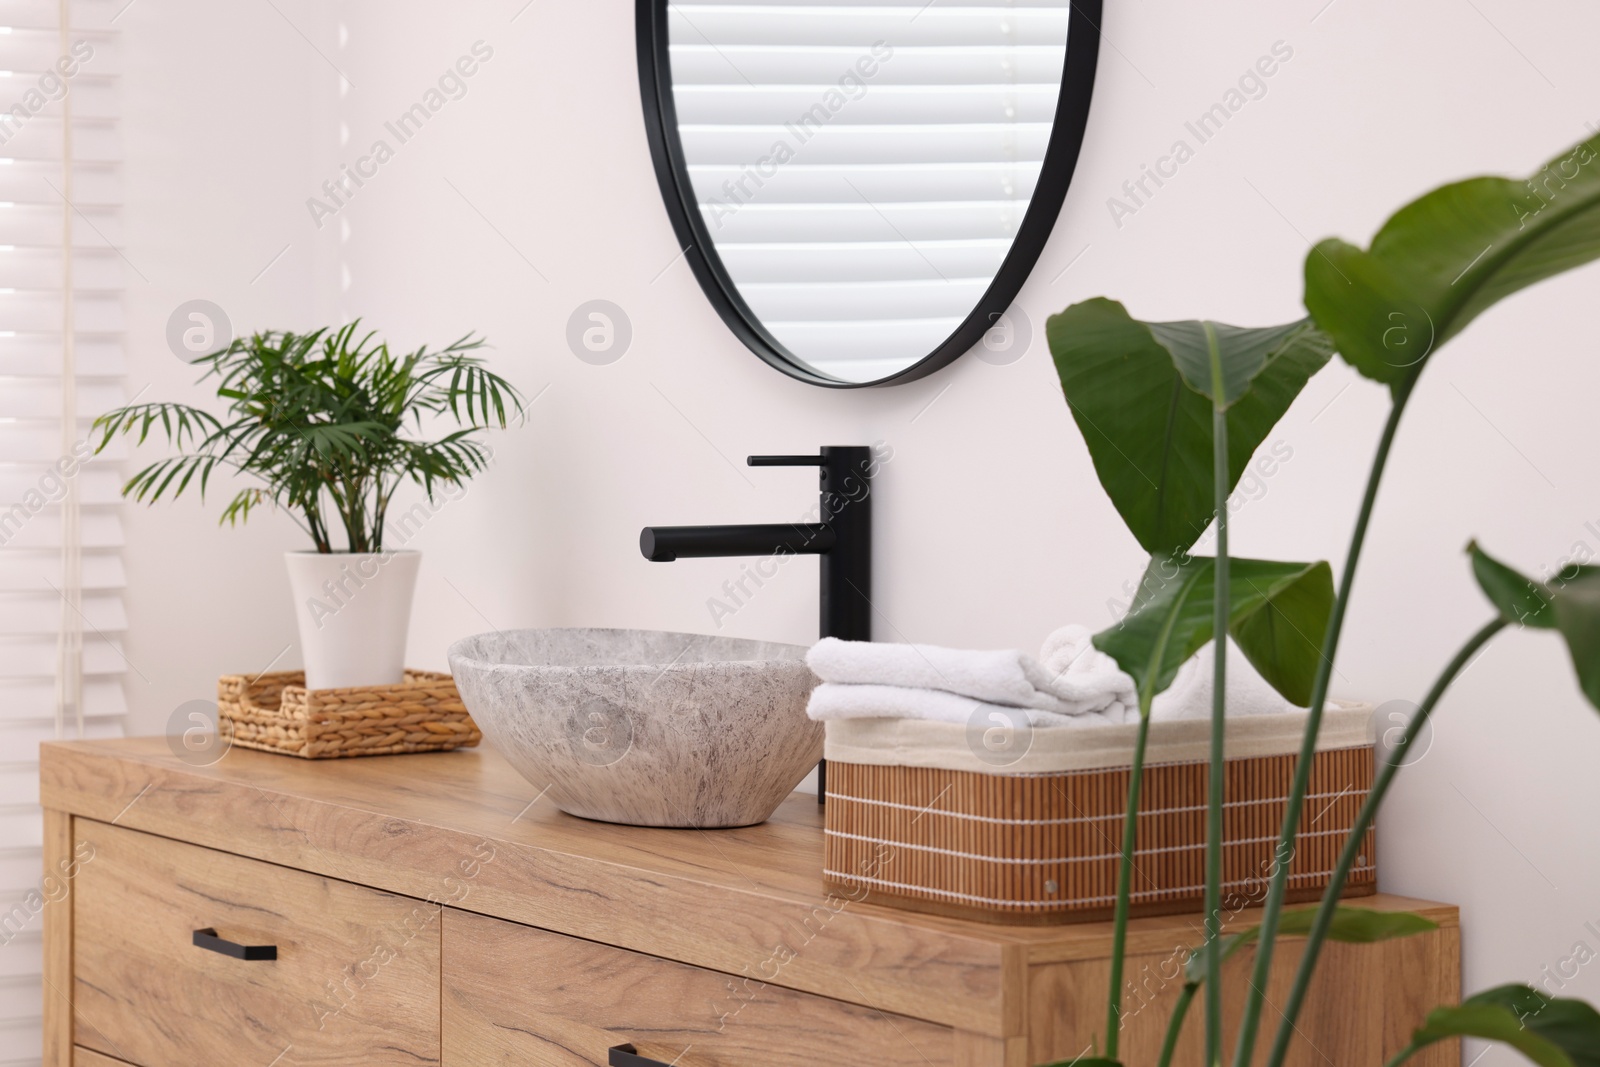 Photo of Stylish bathroom interior with mirror, vessel sink, wooden vanity and green houseplants